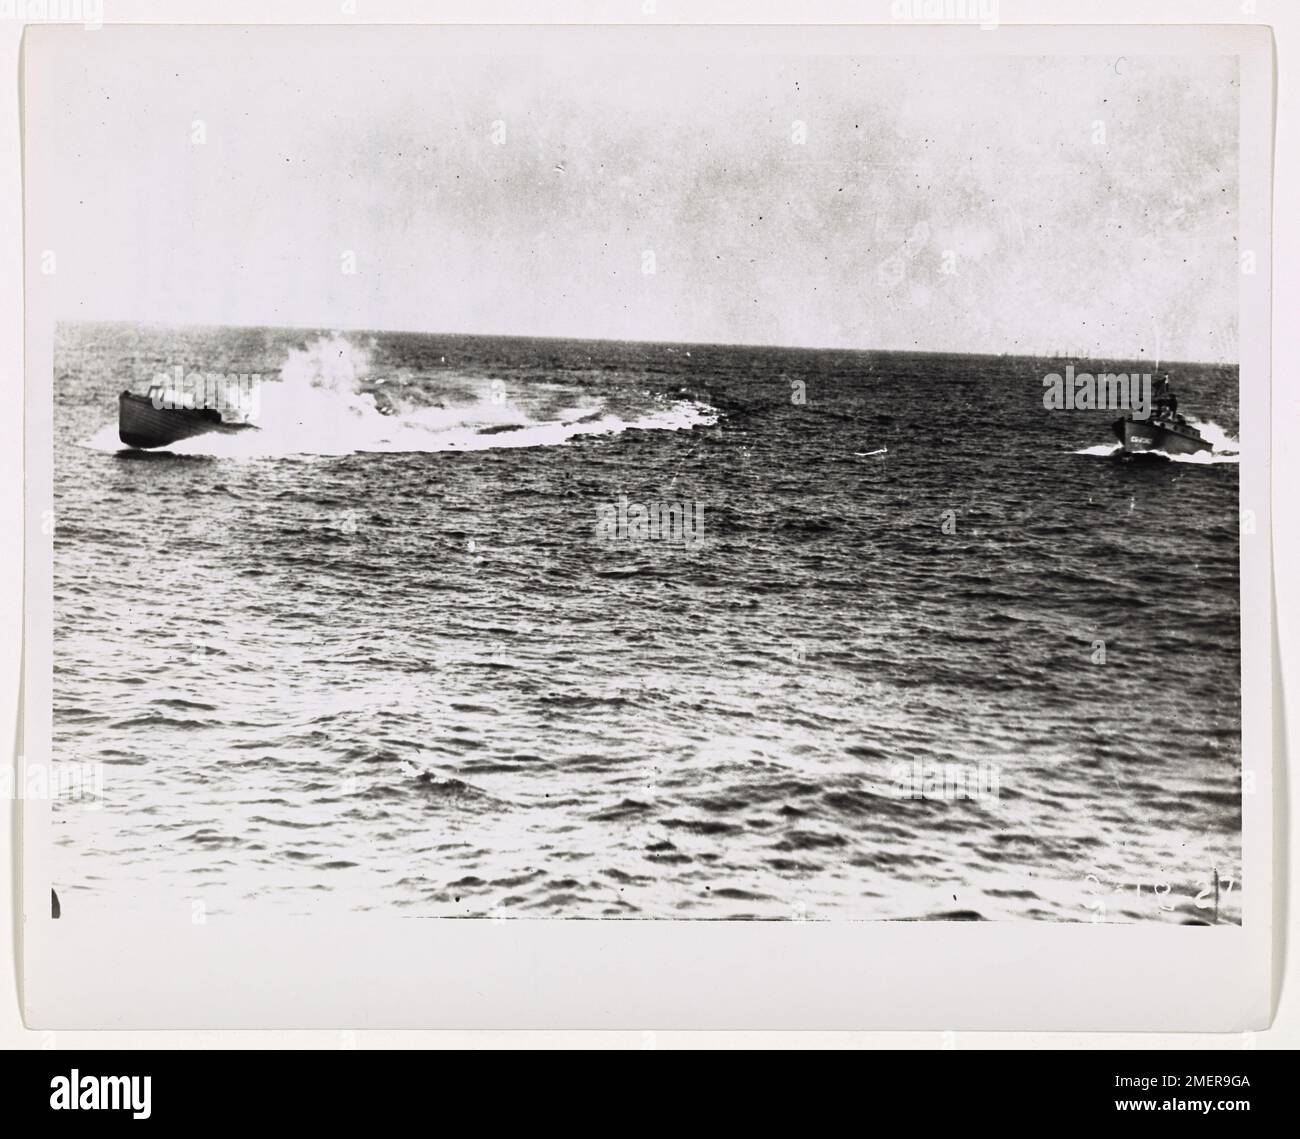 Pursuit of rum-runners. This image depicts a Coast Guard picketboat firing upon a rum-running vessel off the Atlantic coast. Stock Photo